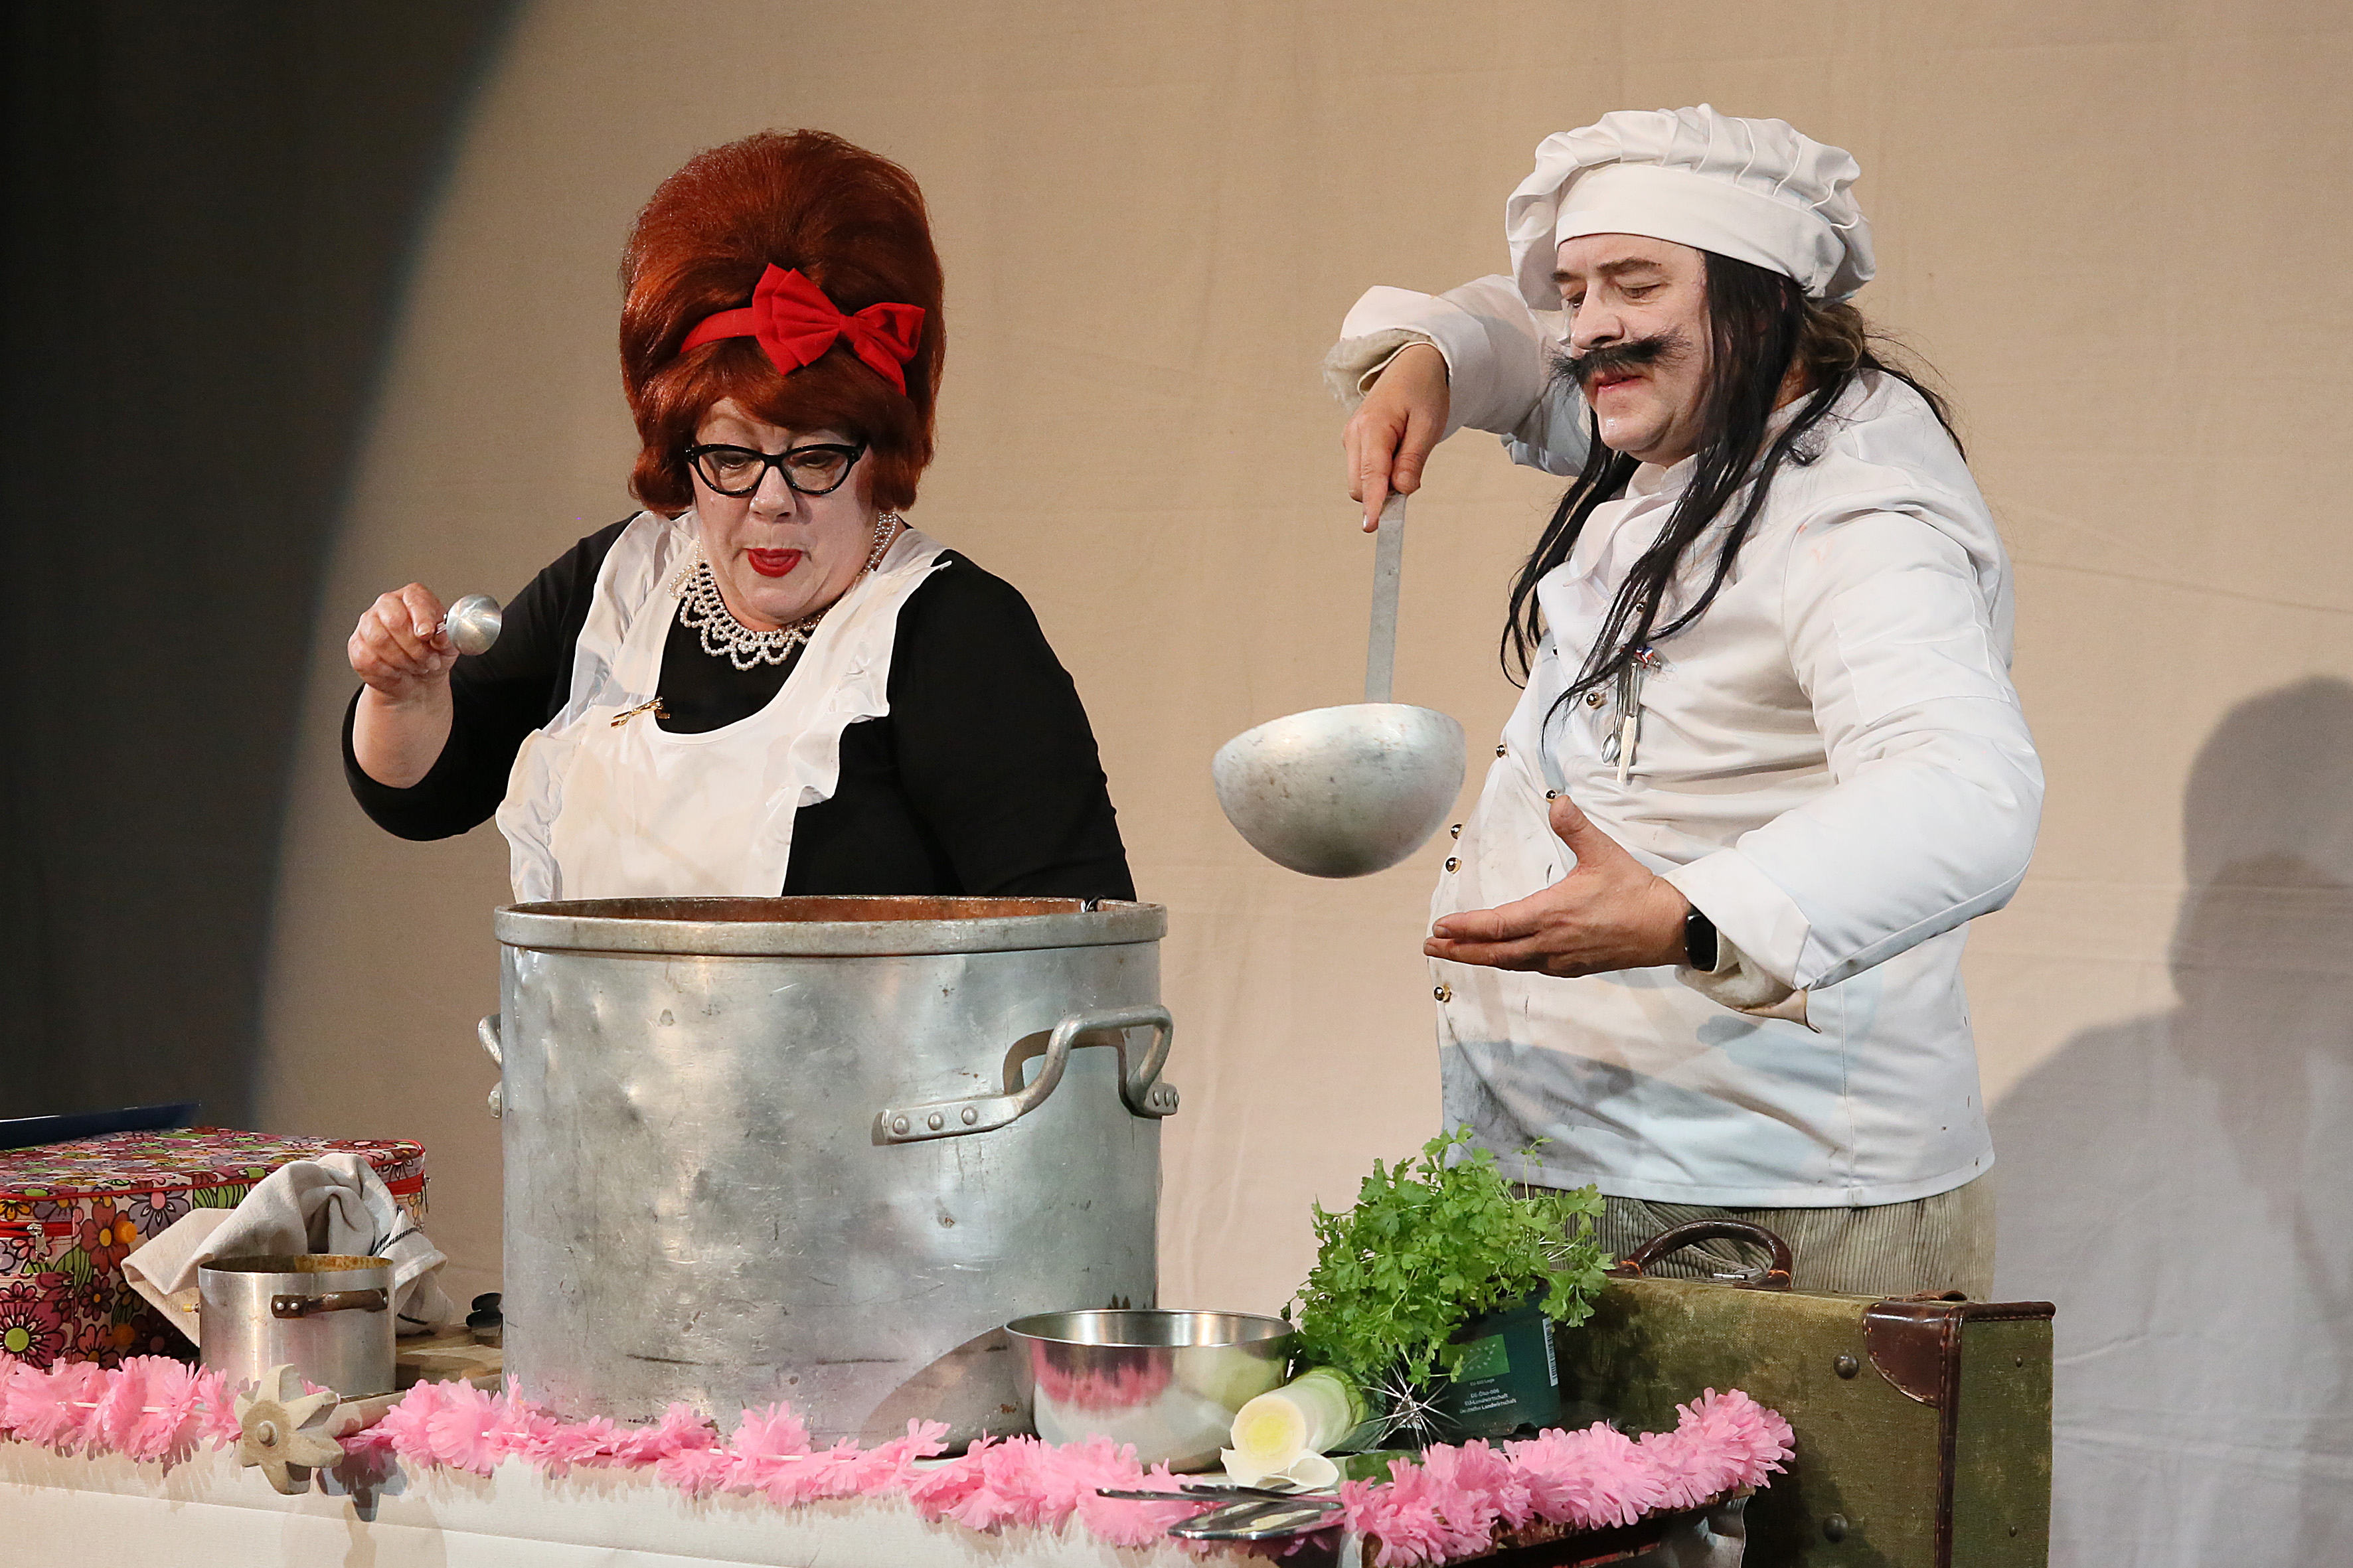 A plump chef with long black hair and a black moustache holds a large silver ladle in his hand. Next to him is a woman with short red hair standing next to a large pot. The pot is placed on a table with fresh vegetables and a pink garland.